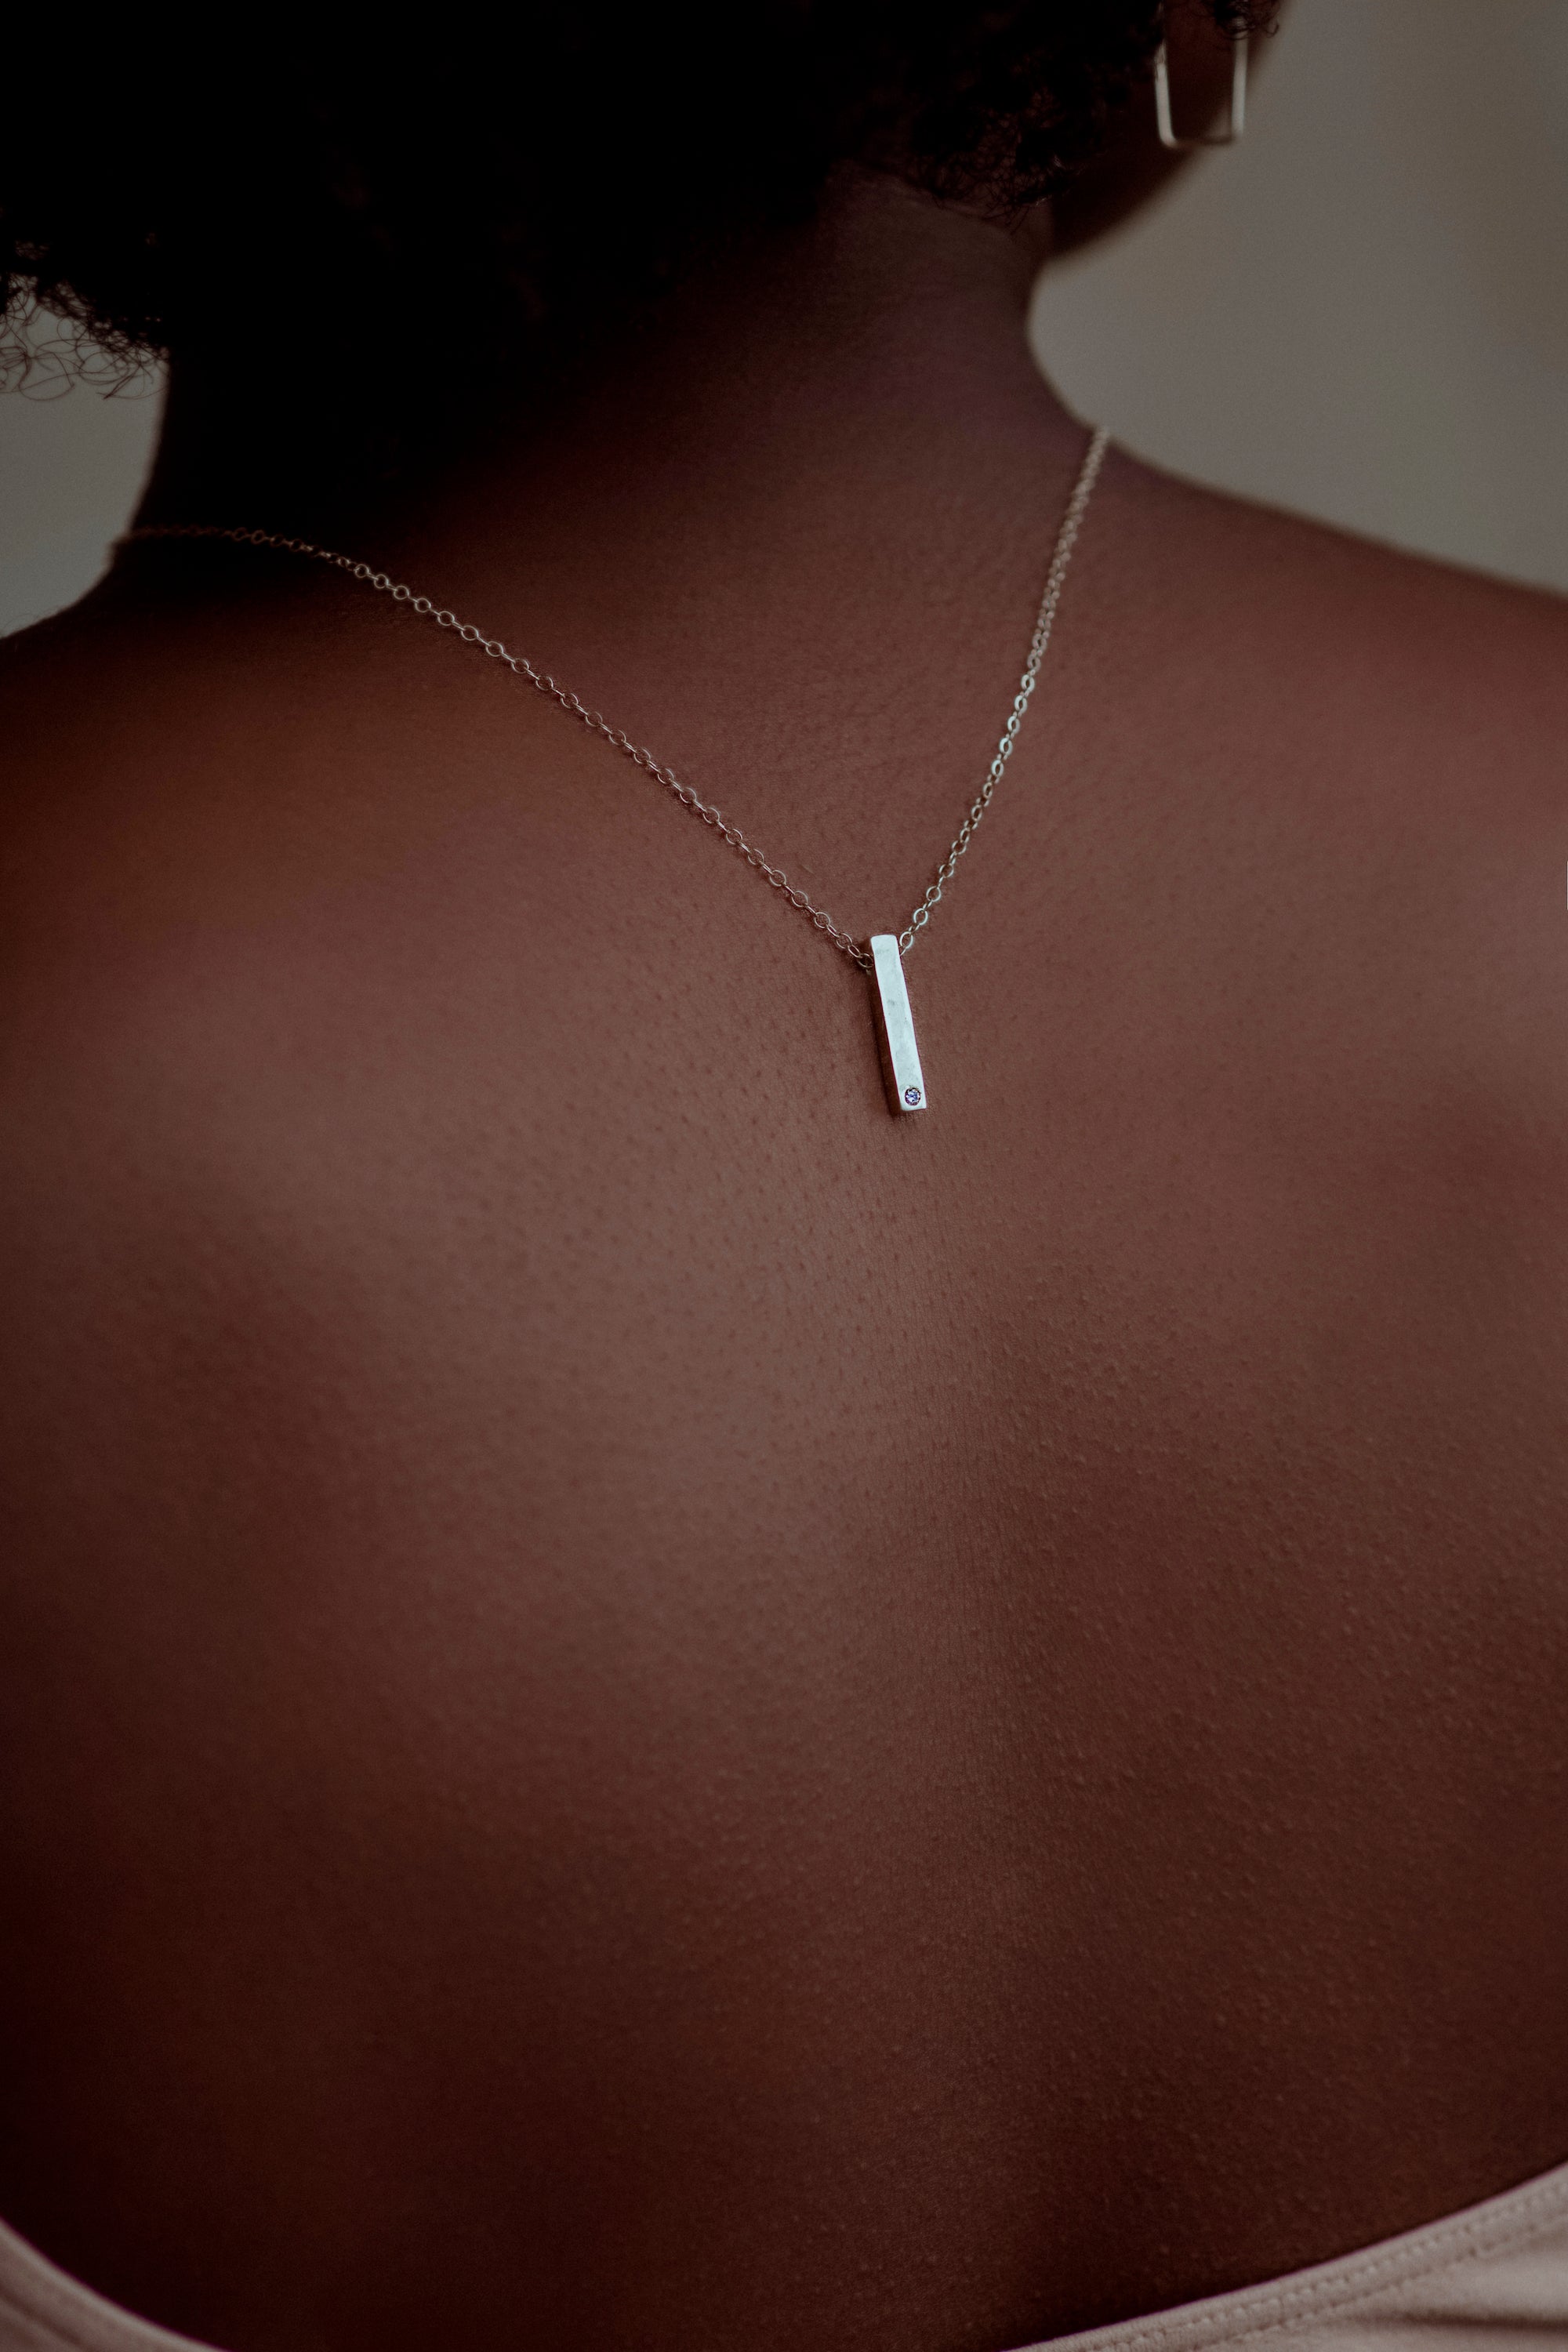 The Classic Bar necklace features a hammered bar pendant with a single 0.02 tcw flush set diamond. 